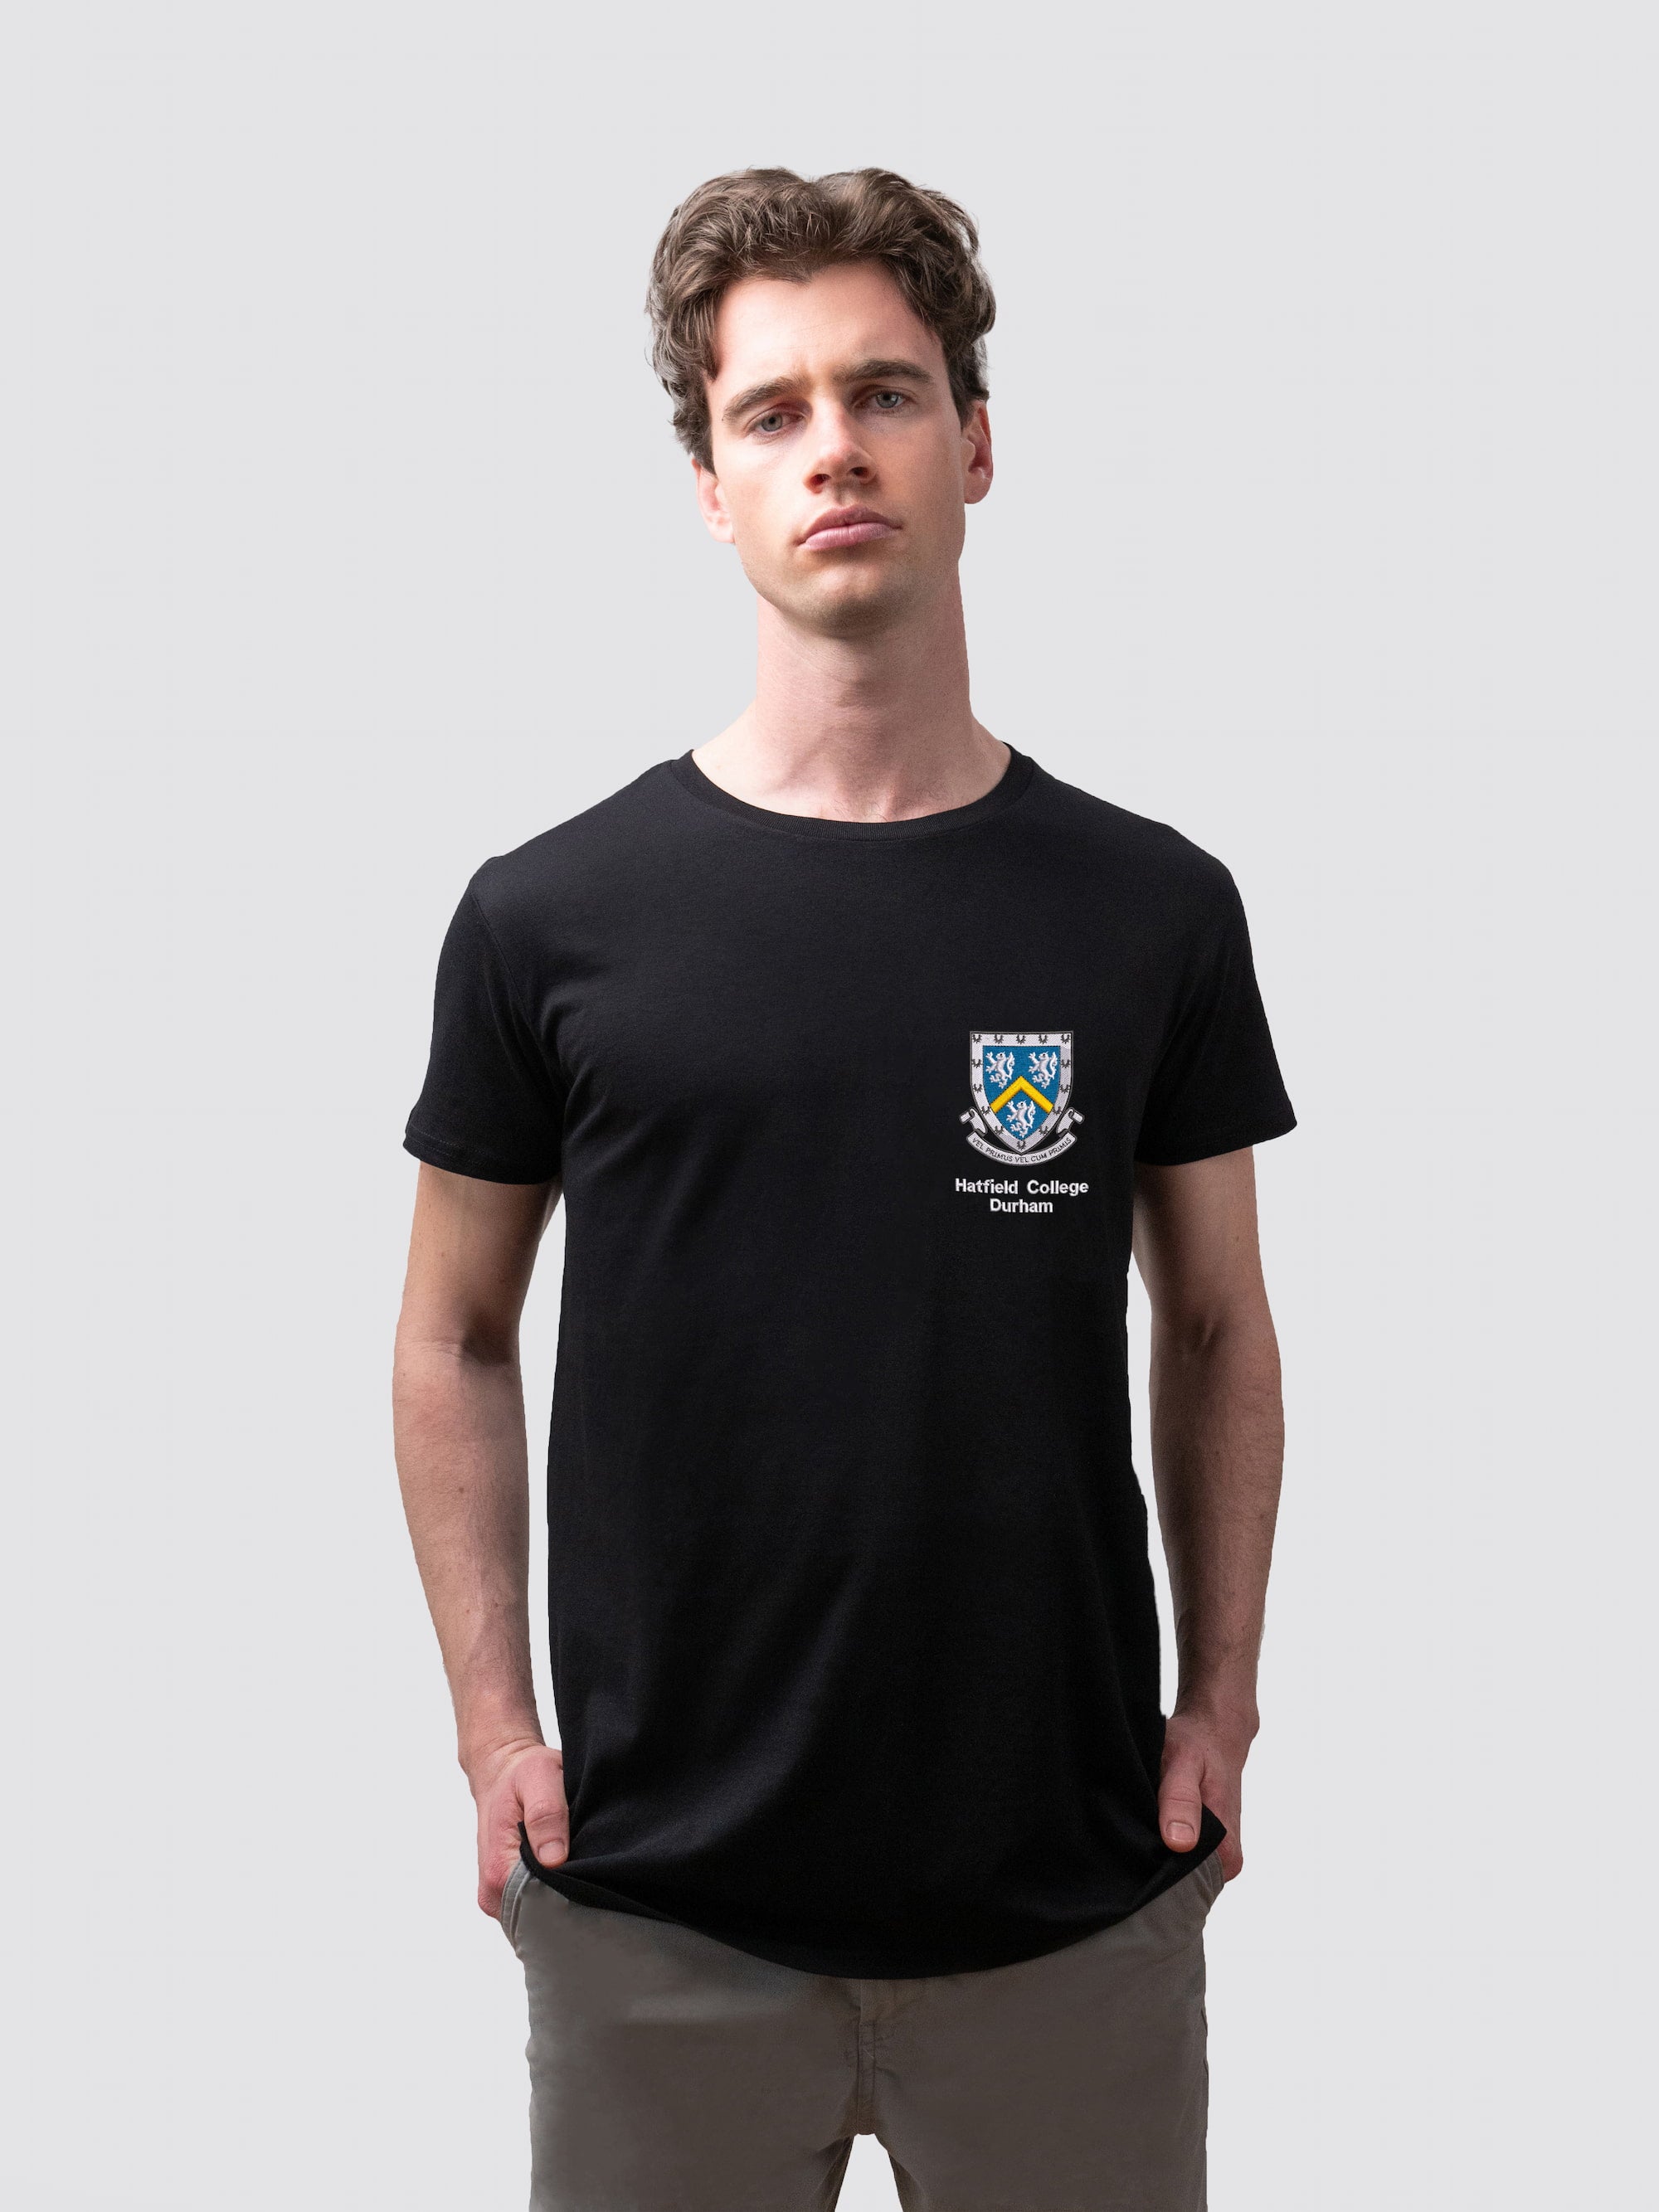 Sustainable Hatfield t-shirt, made from organic cotton 